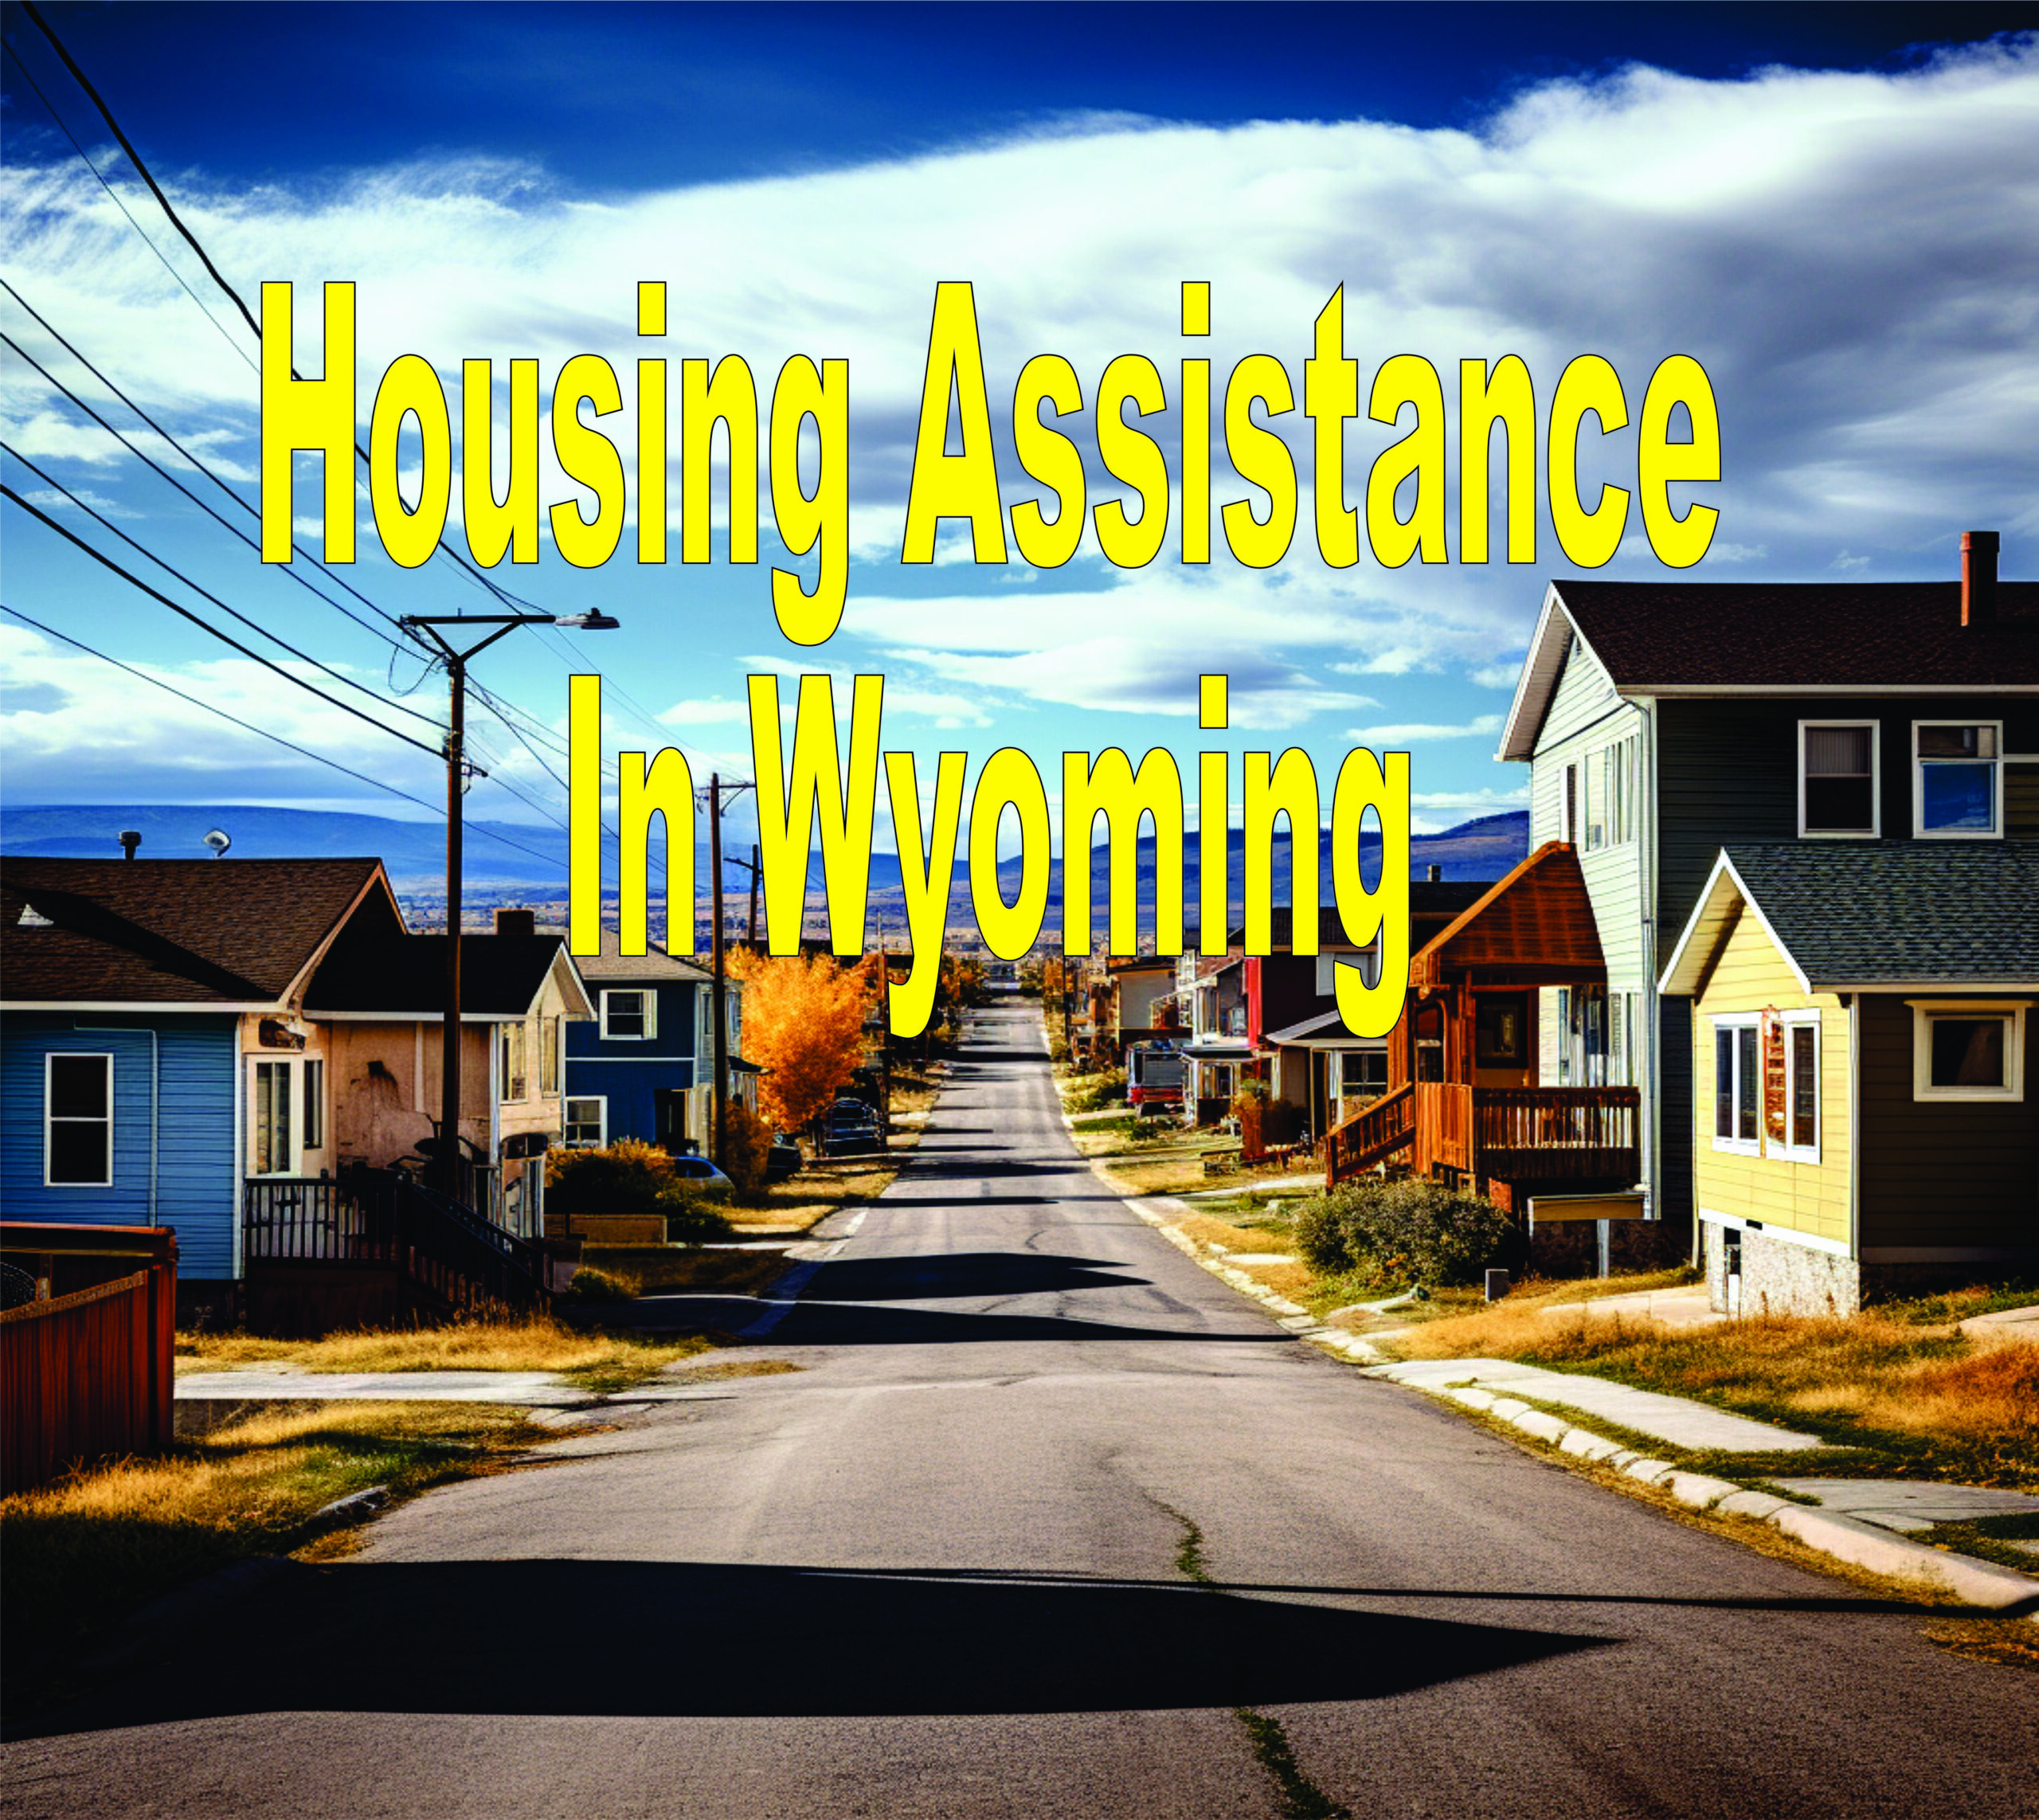 Housing Assistance In Wyoming